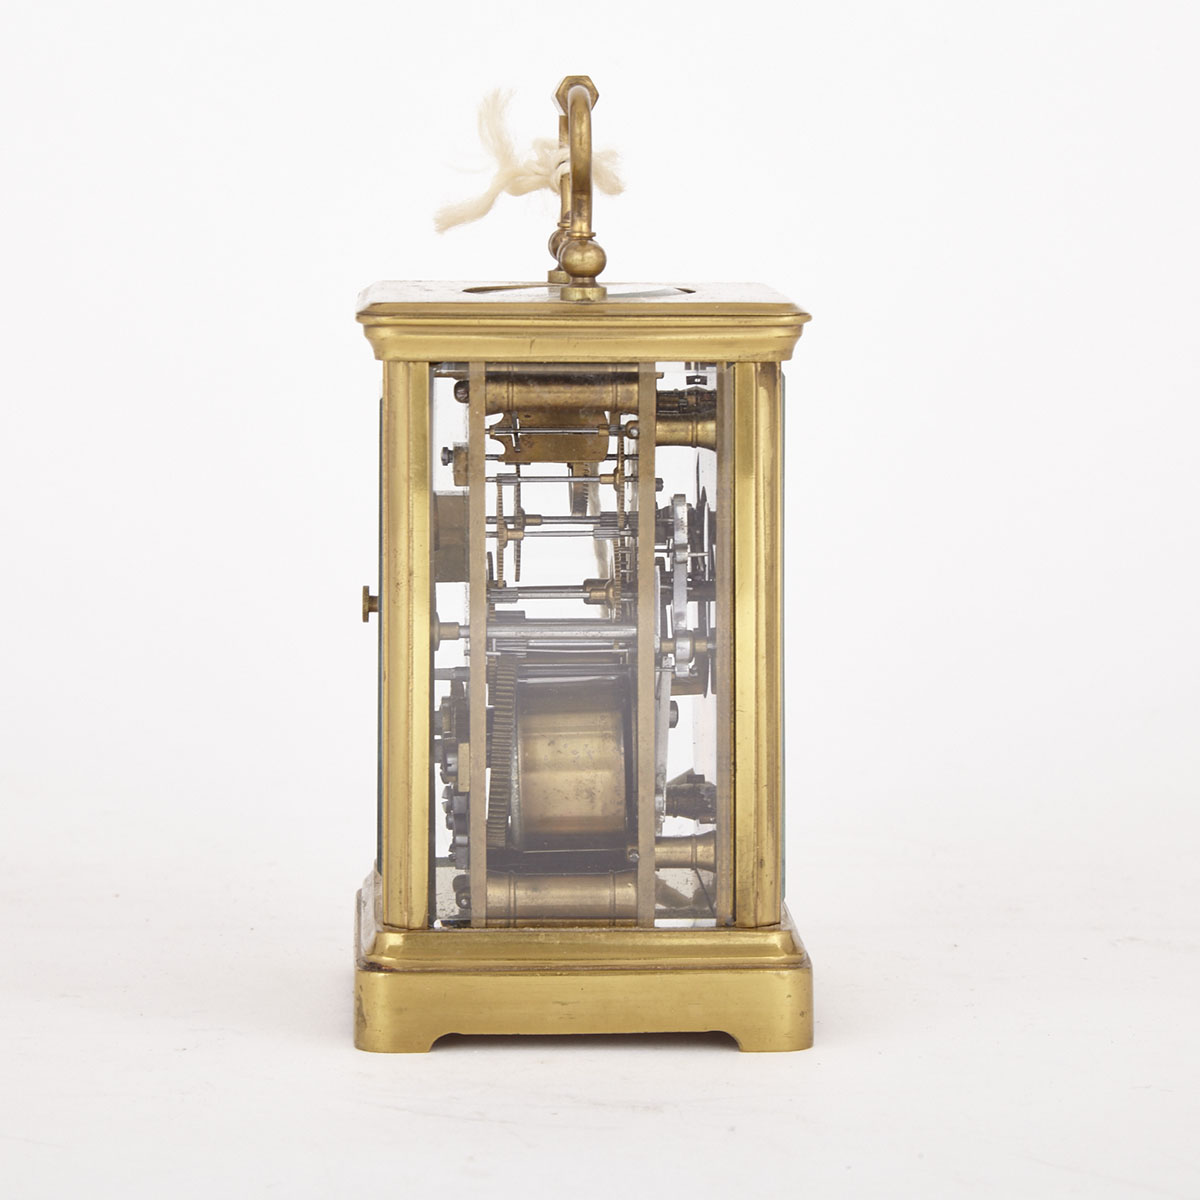 French Gilt Brass Carriage Clock Retailed by John Wanless & Co., Toronto, c.1900